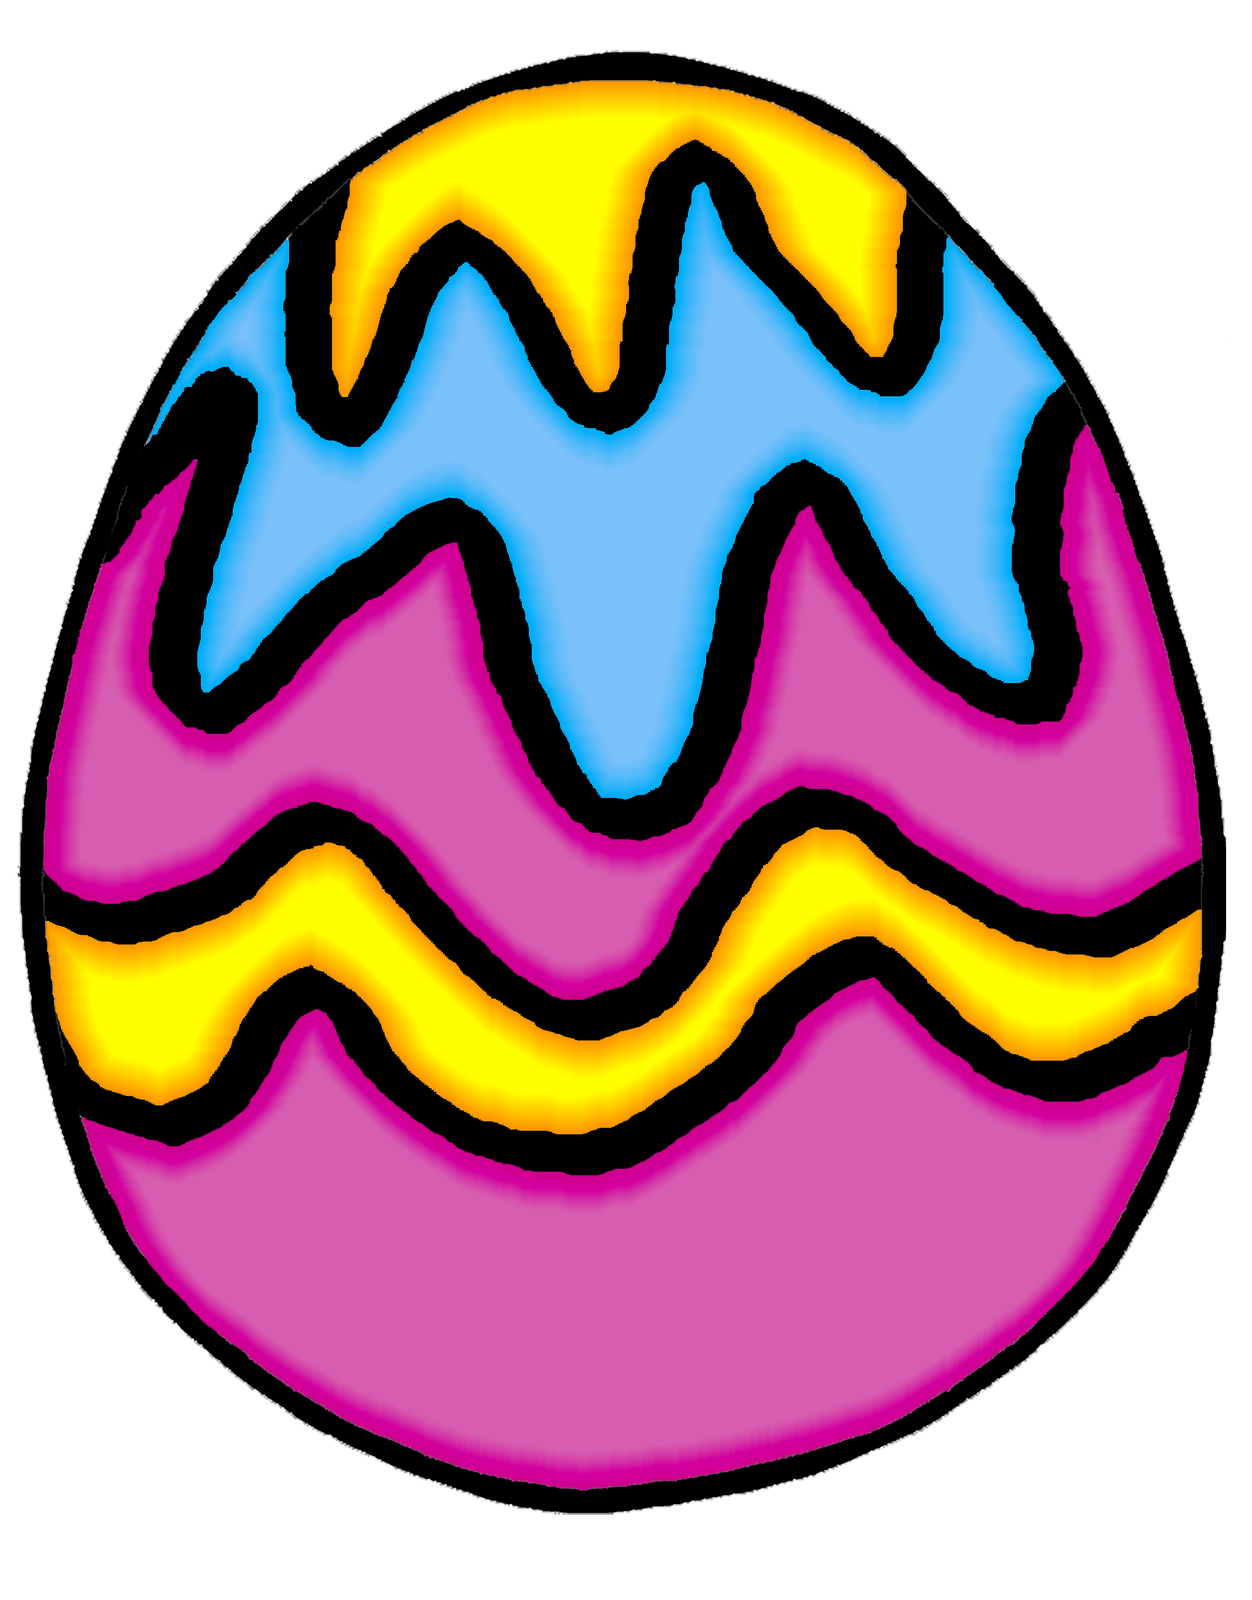 Easter Egg Clipart | Clipart Panda - Free Clipart Images